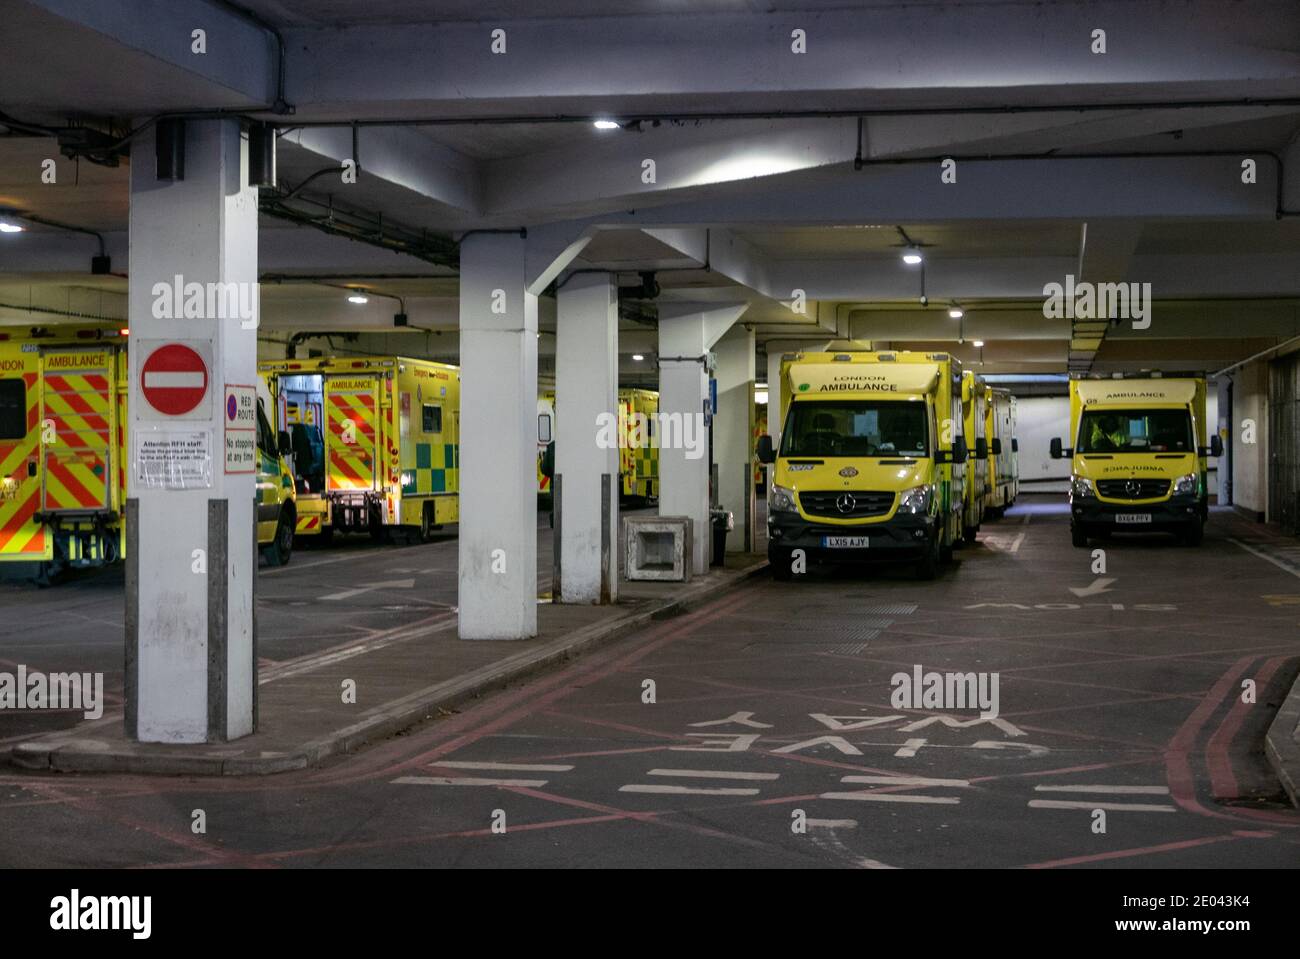 Emergency ambulances of London Ambulance Service queued outside the Royal Free Hospital Accident and Emergency (A&E) department. Stock Photo